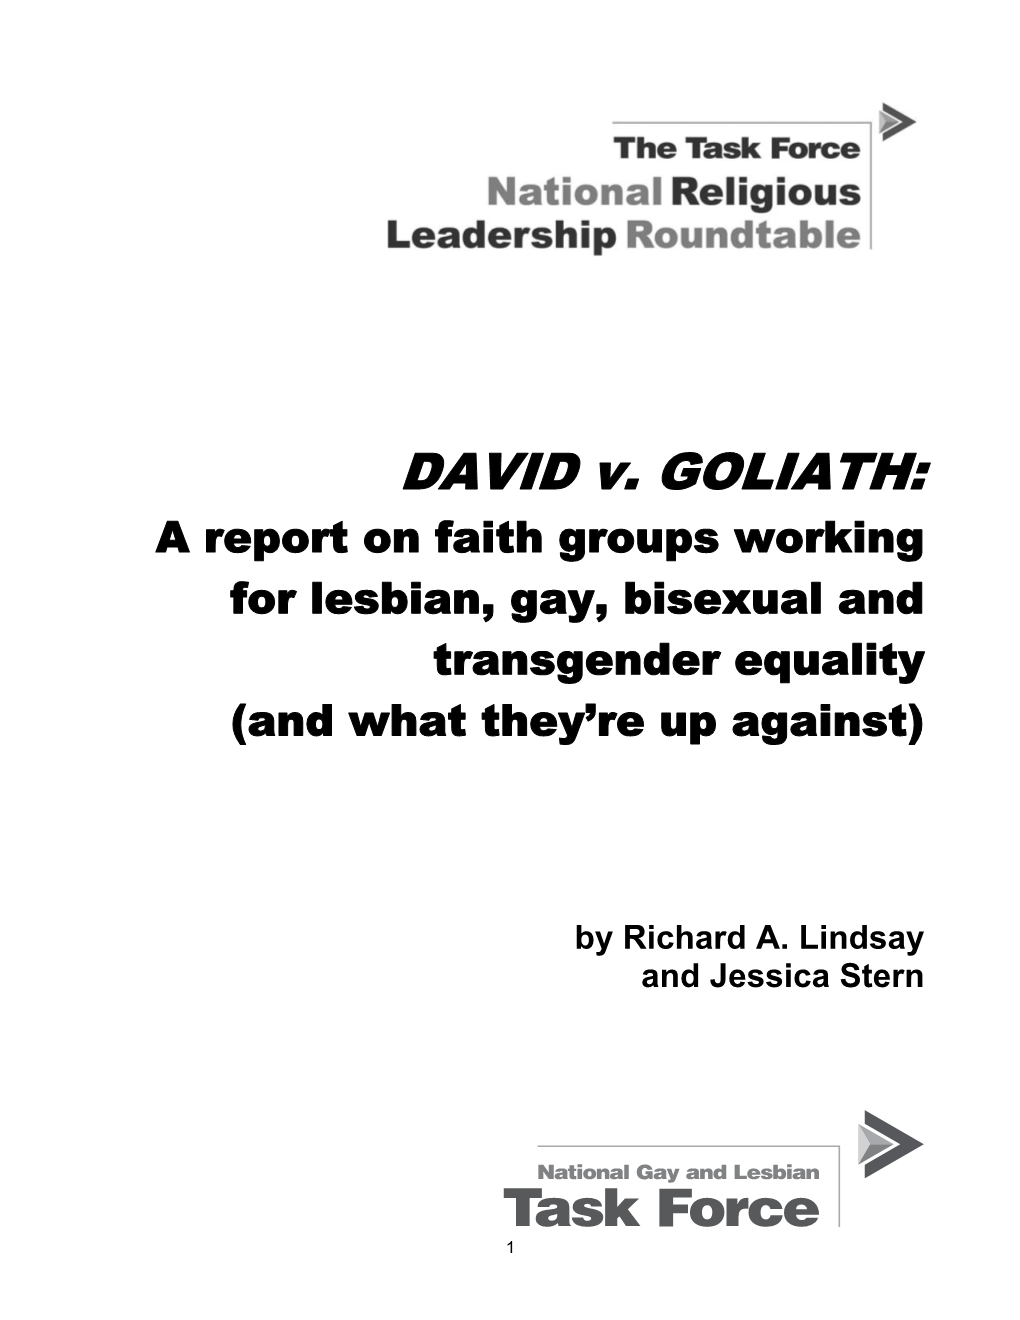 DAVID V. GOLIATH: a Report on Faith Groups Working for LGBT Equality